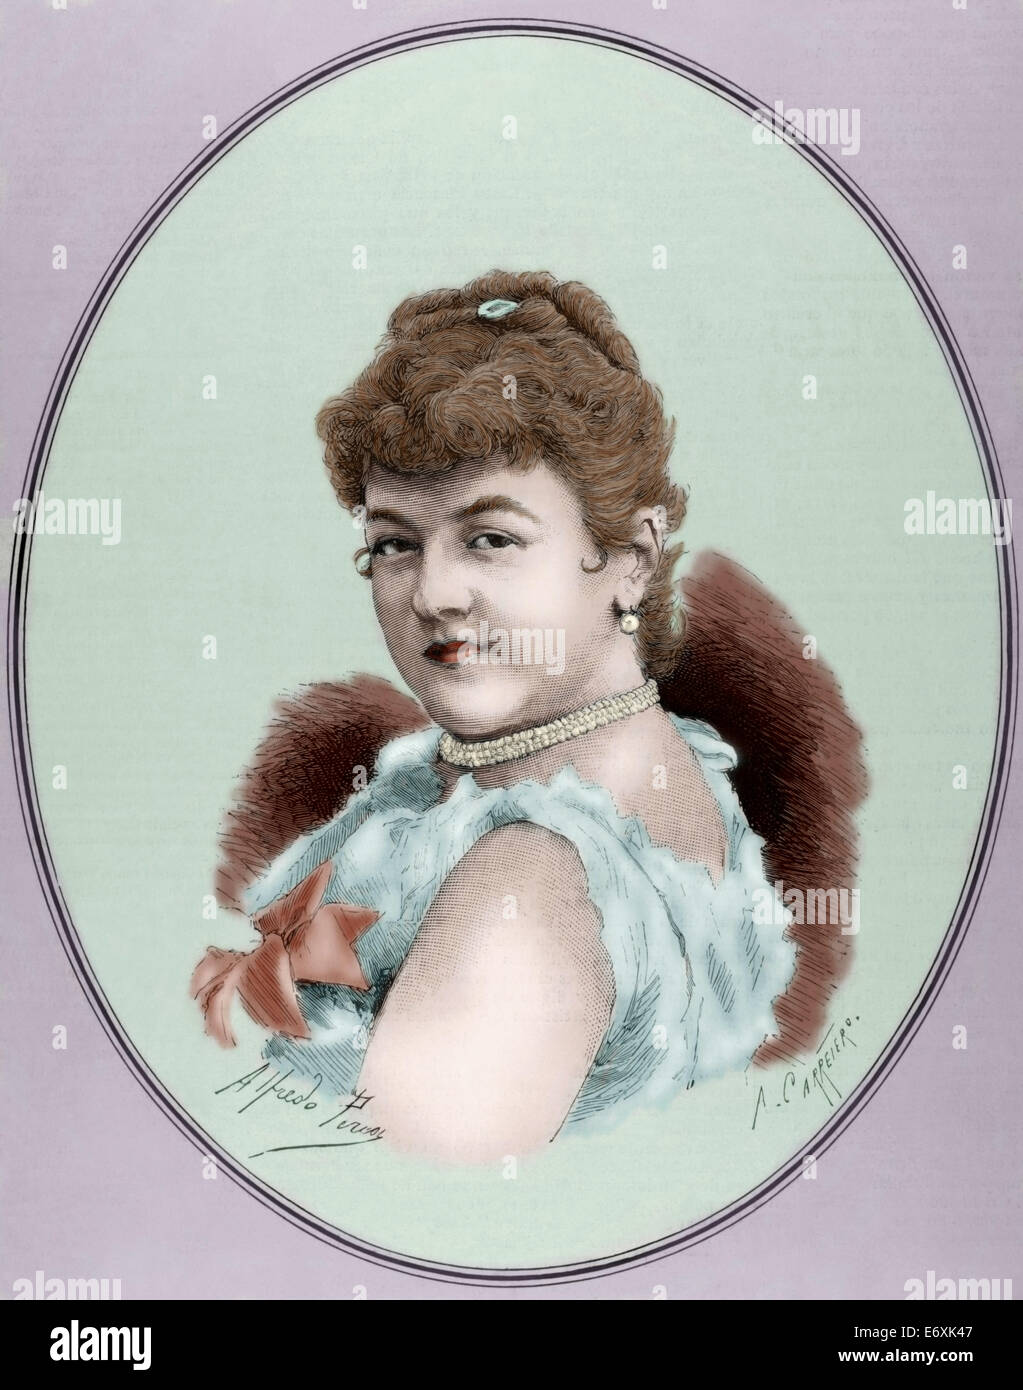 Mila Kupfer-Berger (1852-1905). Austrian Soprano. Engraving by A. Carretero. Colored. Stock Photo